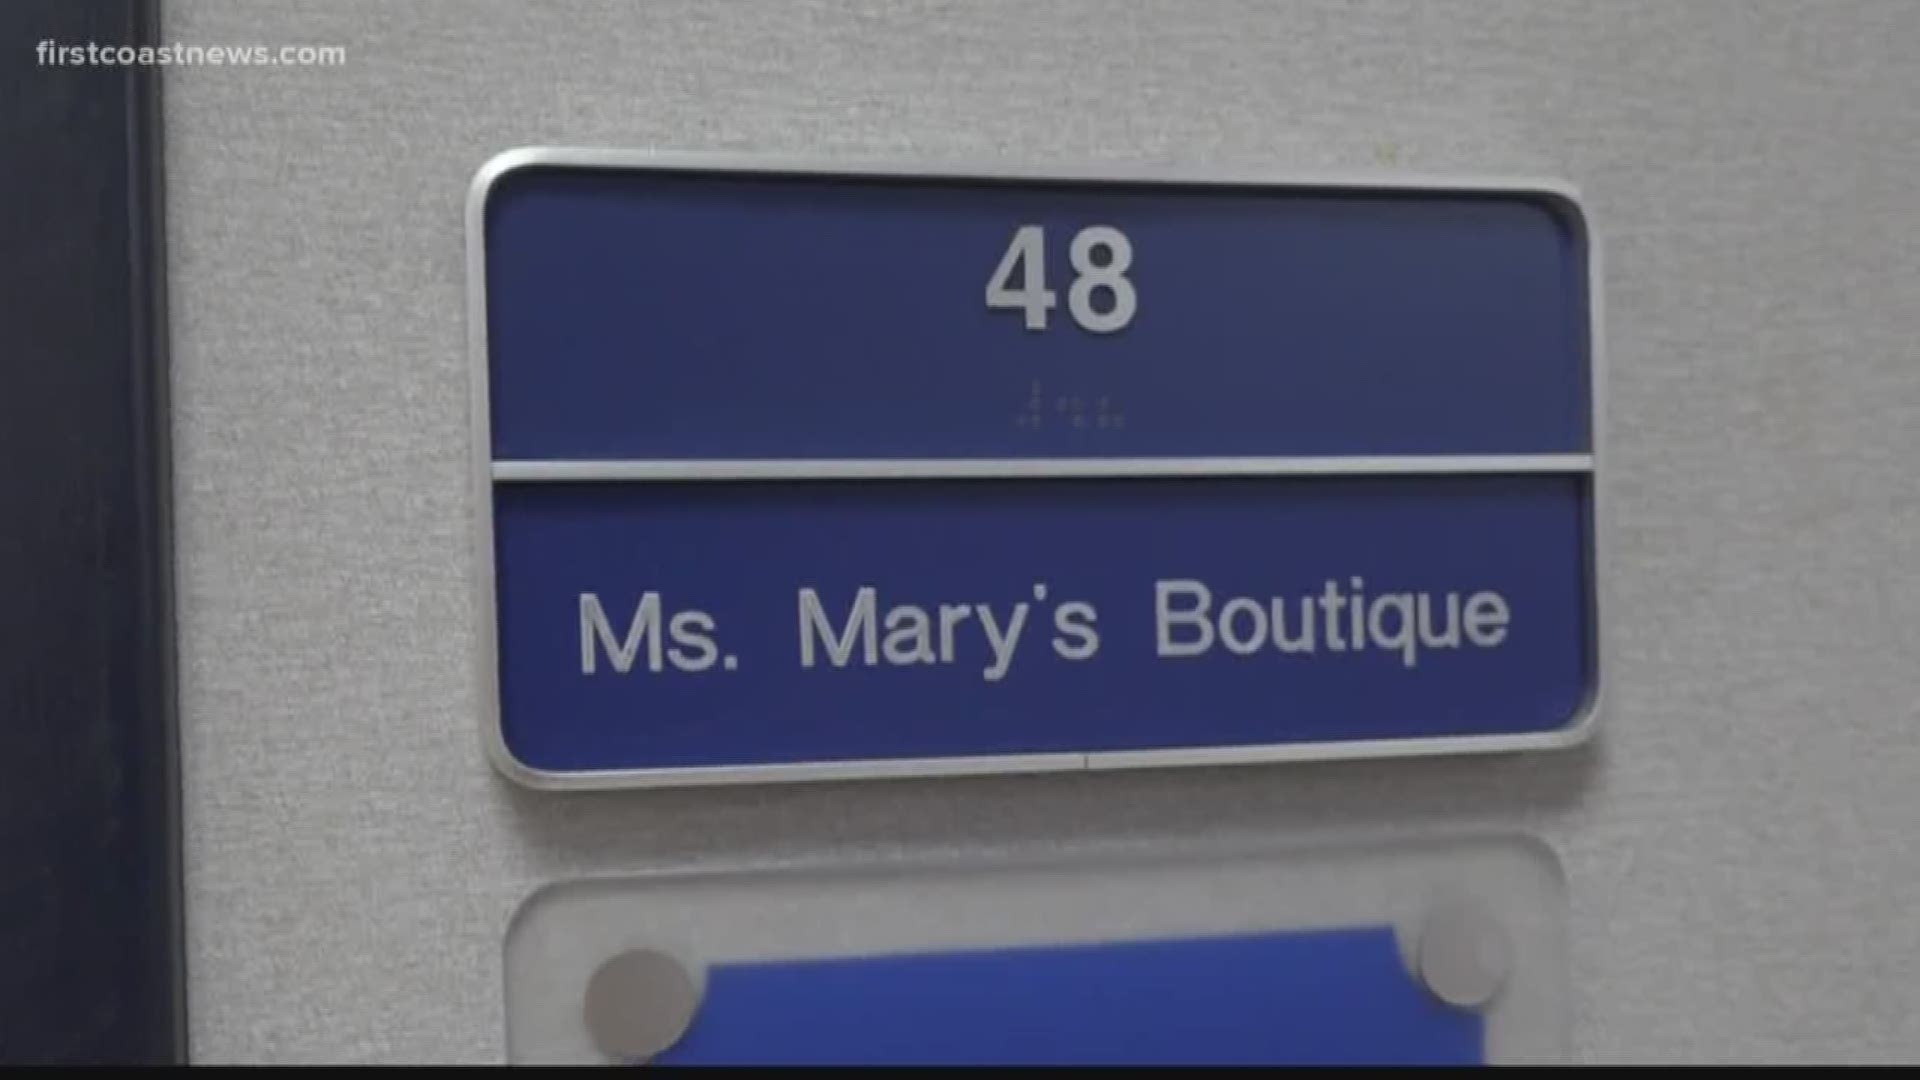 Warner has a corner room inside PACE called "Mrs. Mary's Boutique" where she gives the young girls of PACE a dream shopping experience.